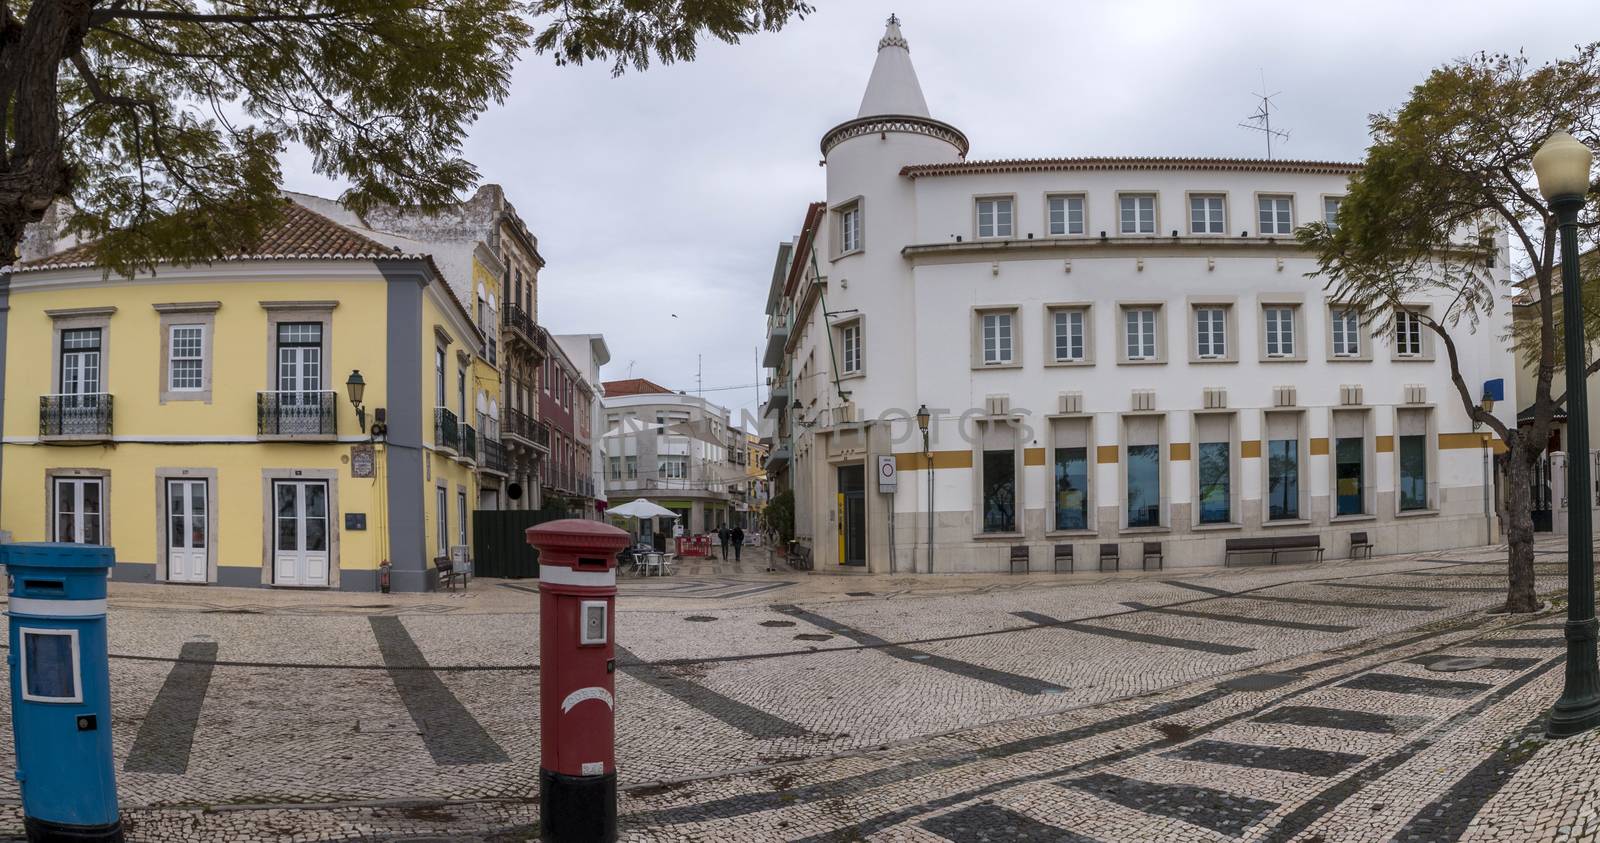 Tourist area downtown of Faro city with cobblestone streets and stores.